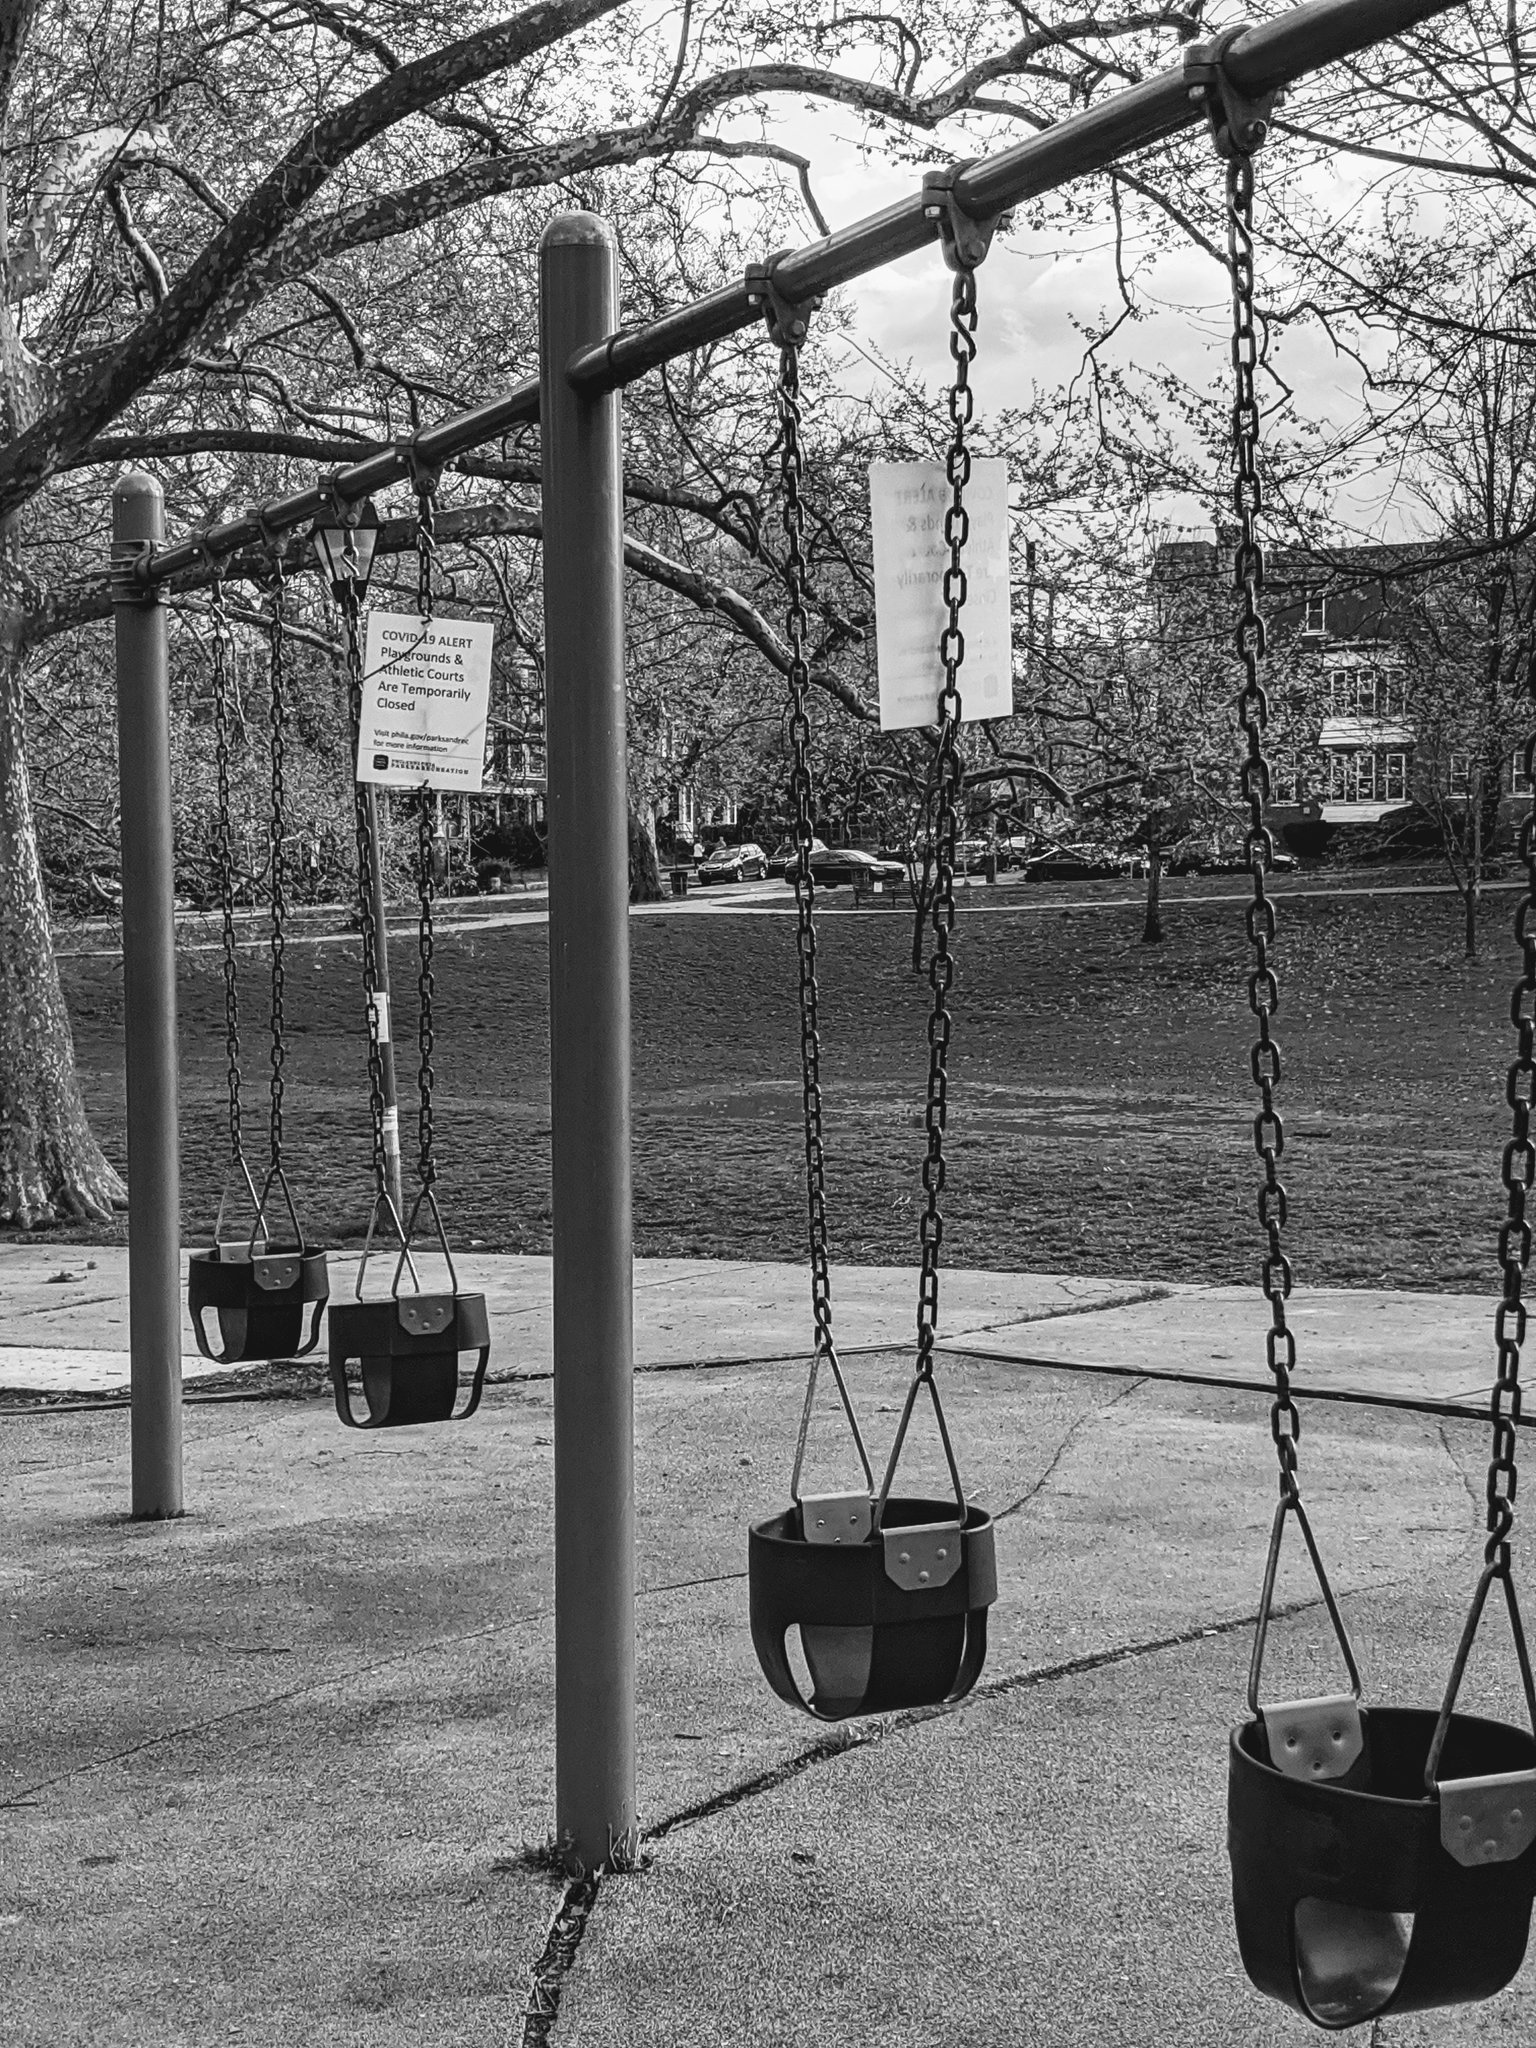 Park swings at a playground sit empty with a posted coronavirus warning sign indicating the park is closed.